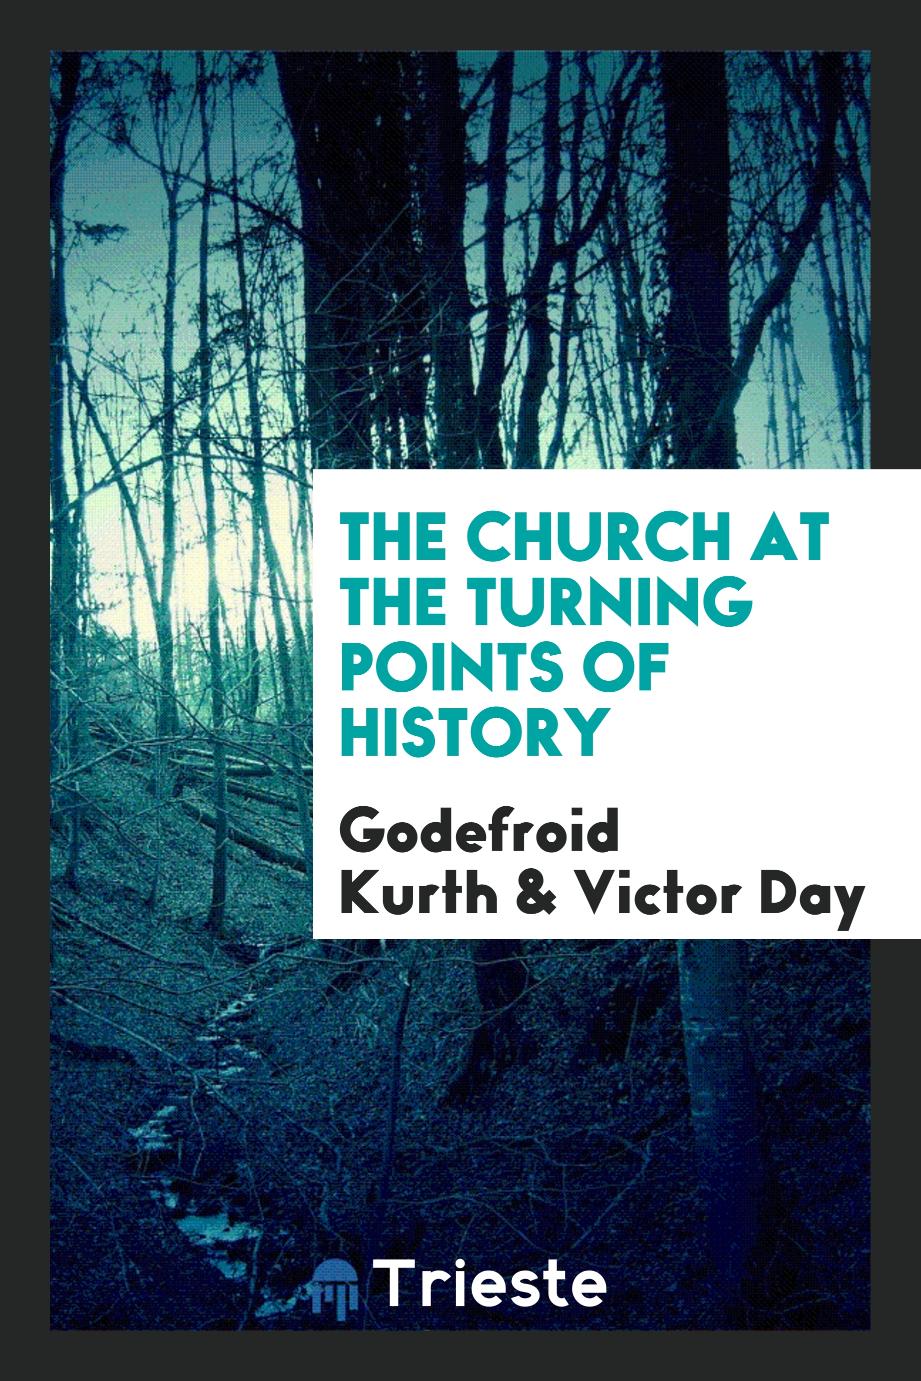 The church at the turning points of history